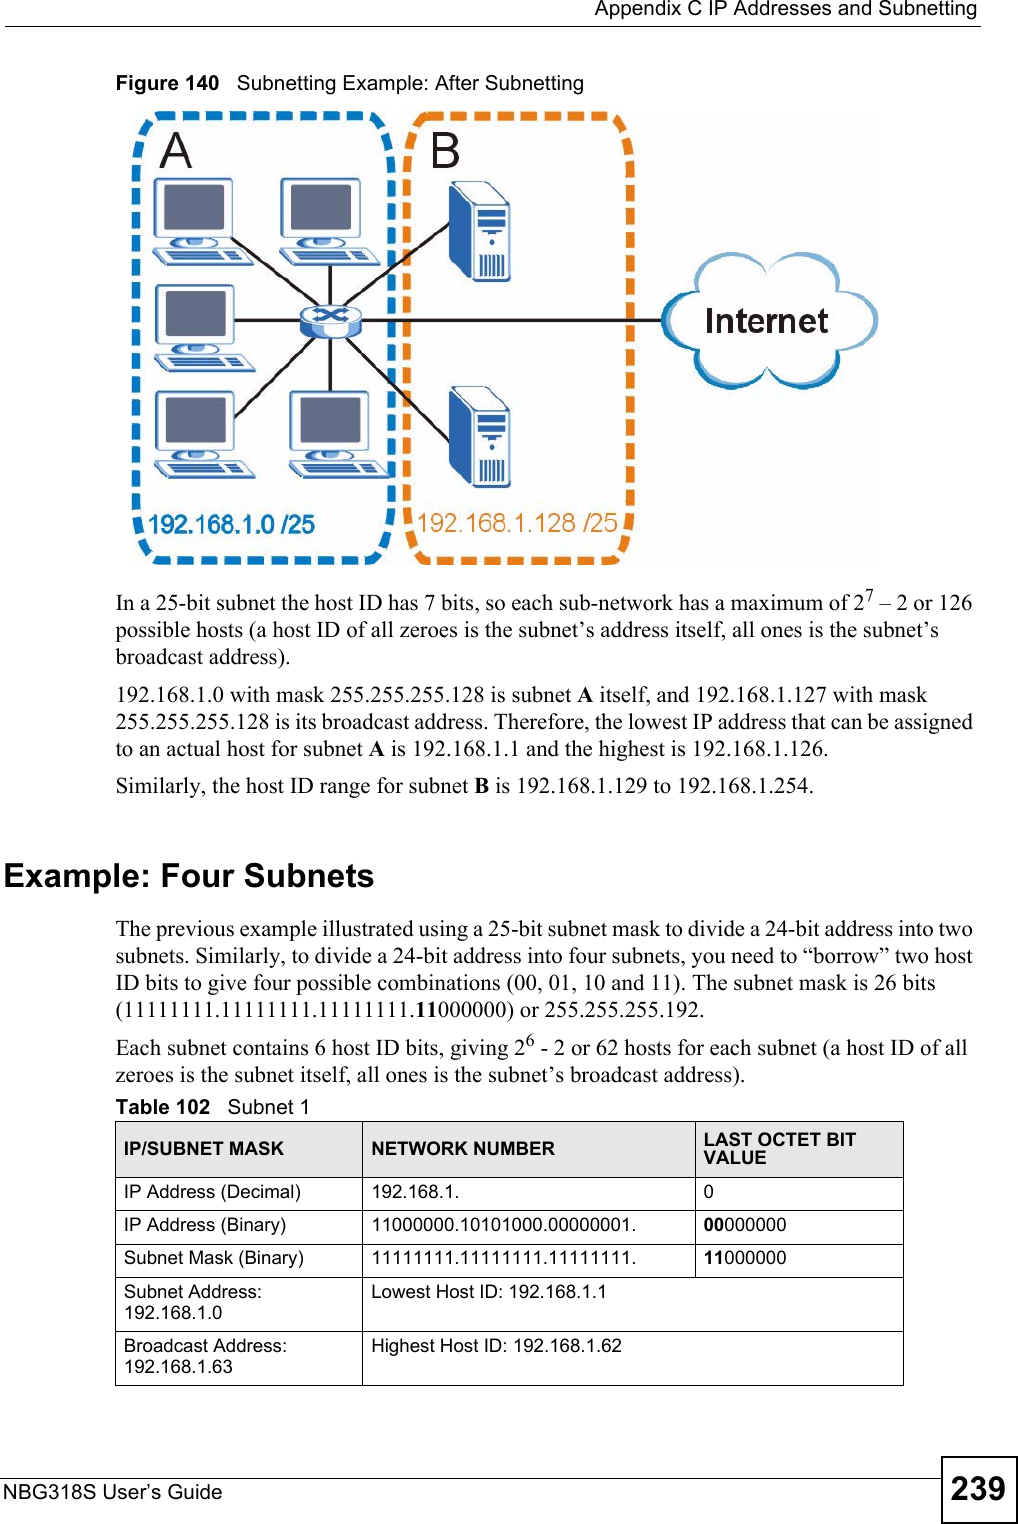  Appendix C IP Addresses and SubnettingNBG318S User’s Guide 239Figure 140   Subnetting Example: After SubnettingIn a 25-bit subnet the host ID has 7 bits, so each sub-network has a maximum of 27 – 2 or 126 possible hosts (a host ID of all zeroes is the subnet’s address itself, all ones is the subnet’s broadcast address).192.168.1.0 with mask 255.255.255.128 is subnet A itself, and 192.168.1.127 with mask 255.255.255.128 is its broadcast address. Therefore, the lowest IP address that can be assigned to an actual host for subnet A is 192.168.1.1 and the highest is 192.168.1.126. Similarly, the host ID range for subnet B is 192.168.1.129 to 192.168.1.254.Example: Four Subnets The previous example illustrated using a 25-bit subnet mask to divide a 24-bit address into two subnets. Similarly, to divide a 24-bit address into four subnets, you need to “borrow” two host ID bits to give four possible combinations (00, 01, 10 and 11). The subnet mask is 26 bits (11111111.11111111.11111111.11000000) or 255.255.255.192. Each subnet contains 6 host ID bits, giving 26 - 2 or 62 hosts for each subnet (a host ID of all zeroes is the subnet itself, all ones is the subnet’s broadcast address). Table 102   Subnet 1IP/SUBNET MASK NETWORK NUMBER LAST OCTET BIT VALUEIP Address (Decimal) 192.168.1. 0IP Address (Binary) 11000000.10101000.00000001. 00000000Subnet Mask (Binary) 11111111.11111111.11111111. 11000000Subnet Address: 192.168.1.0Lowest Host ID: 192.168.1.1Broadcast Address: 192.168.1.63Highest Host ID: 192.168.1.62